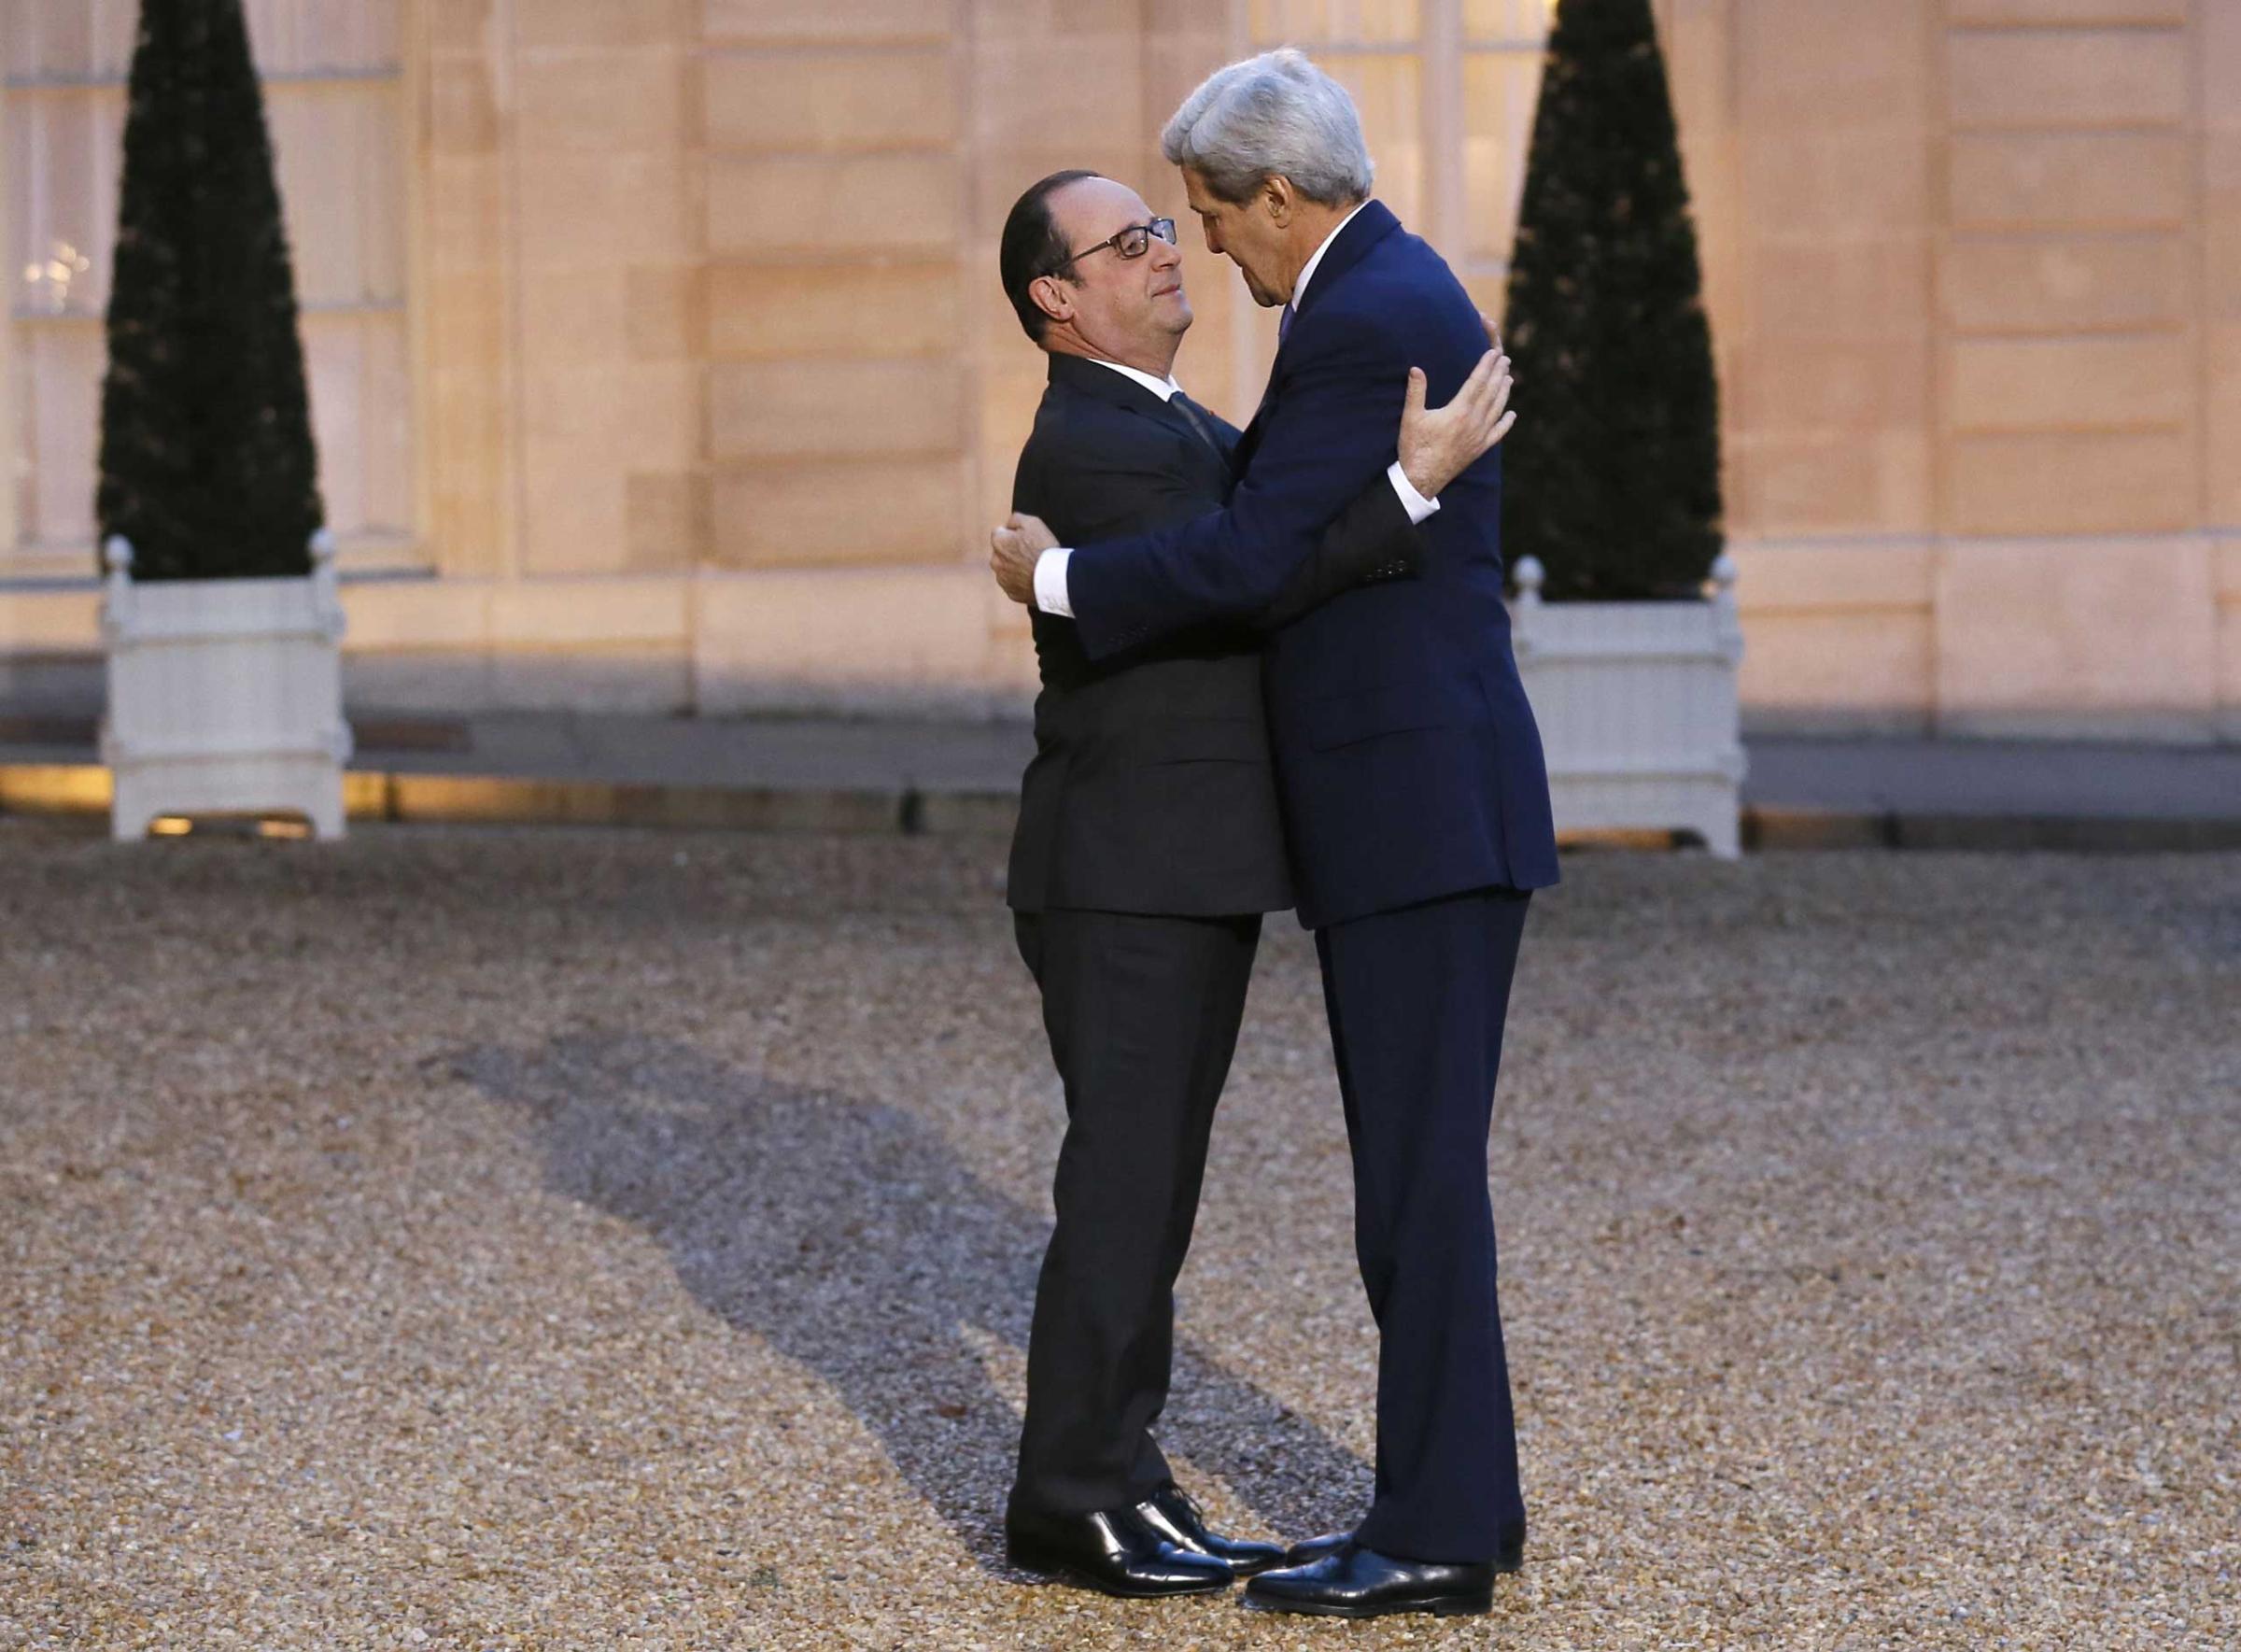 TOPSHOTS-FRANCE-US-DIPLOMACY-GOVERNMENT